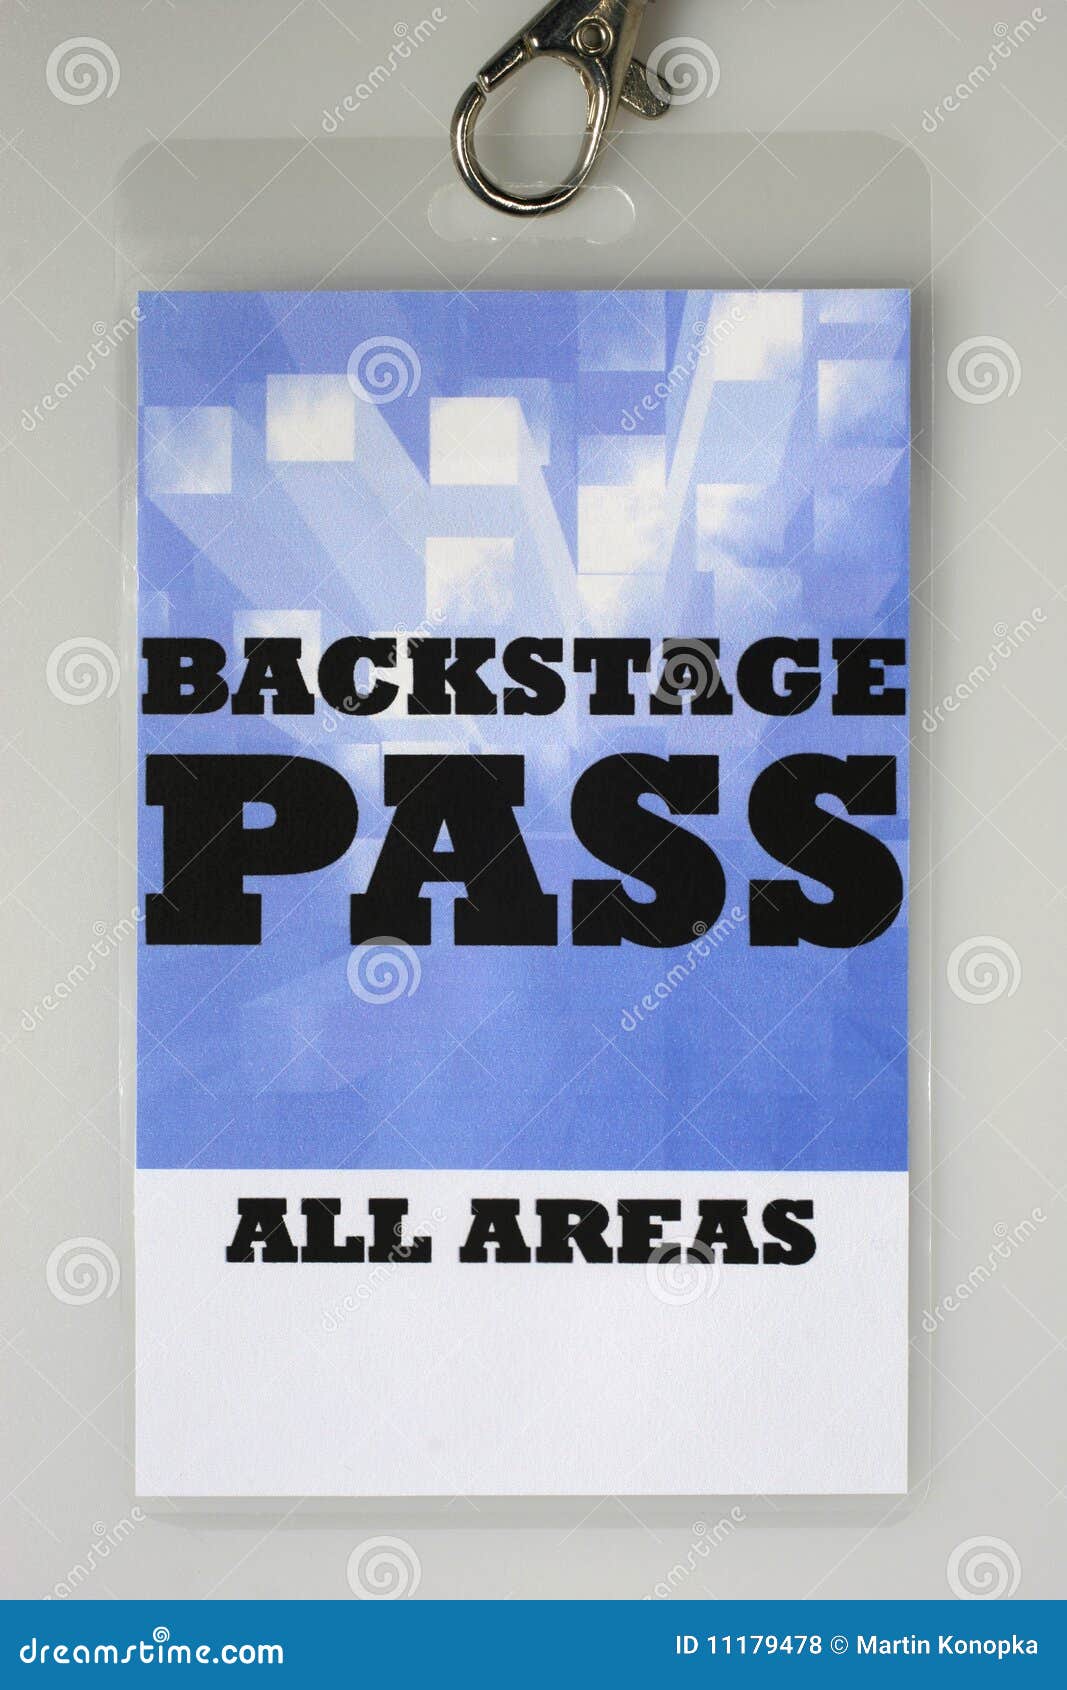 Backstage element of service industry